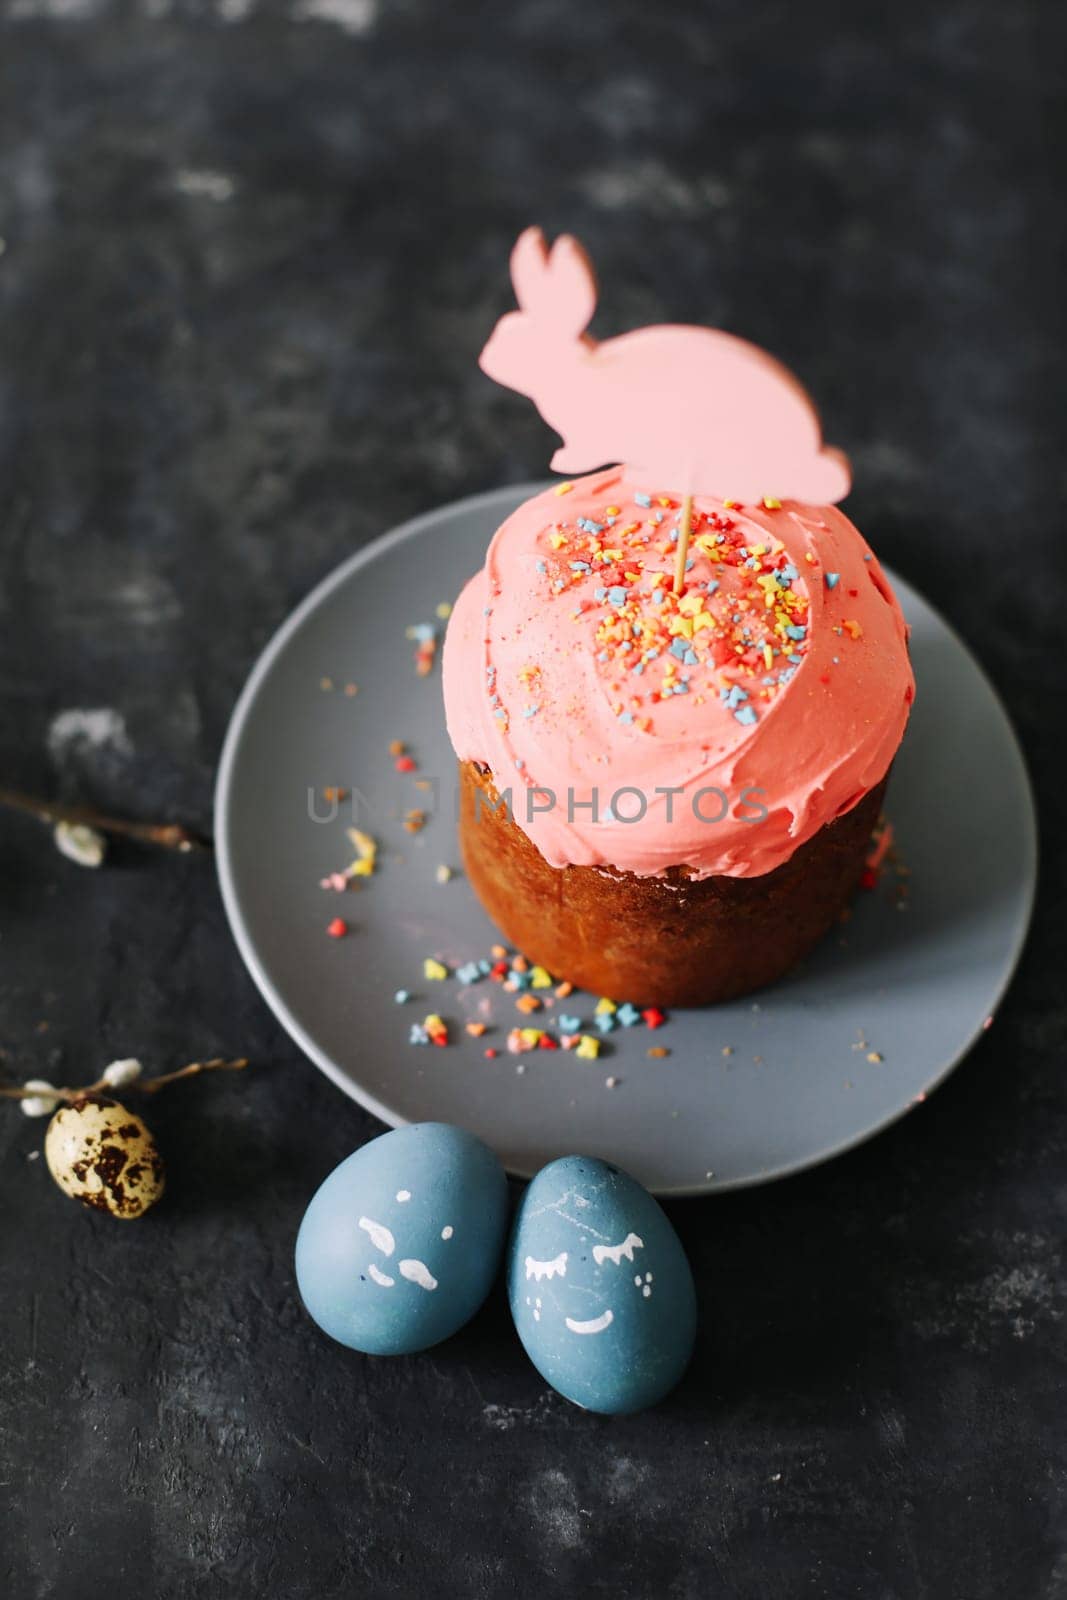 Plate with tasty Easter cake, eggs and willow branches on dark background. High quality photo